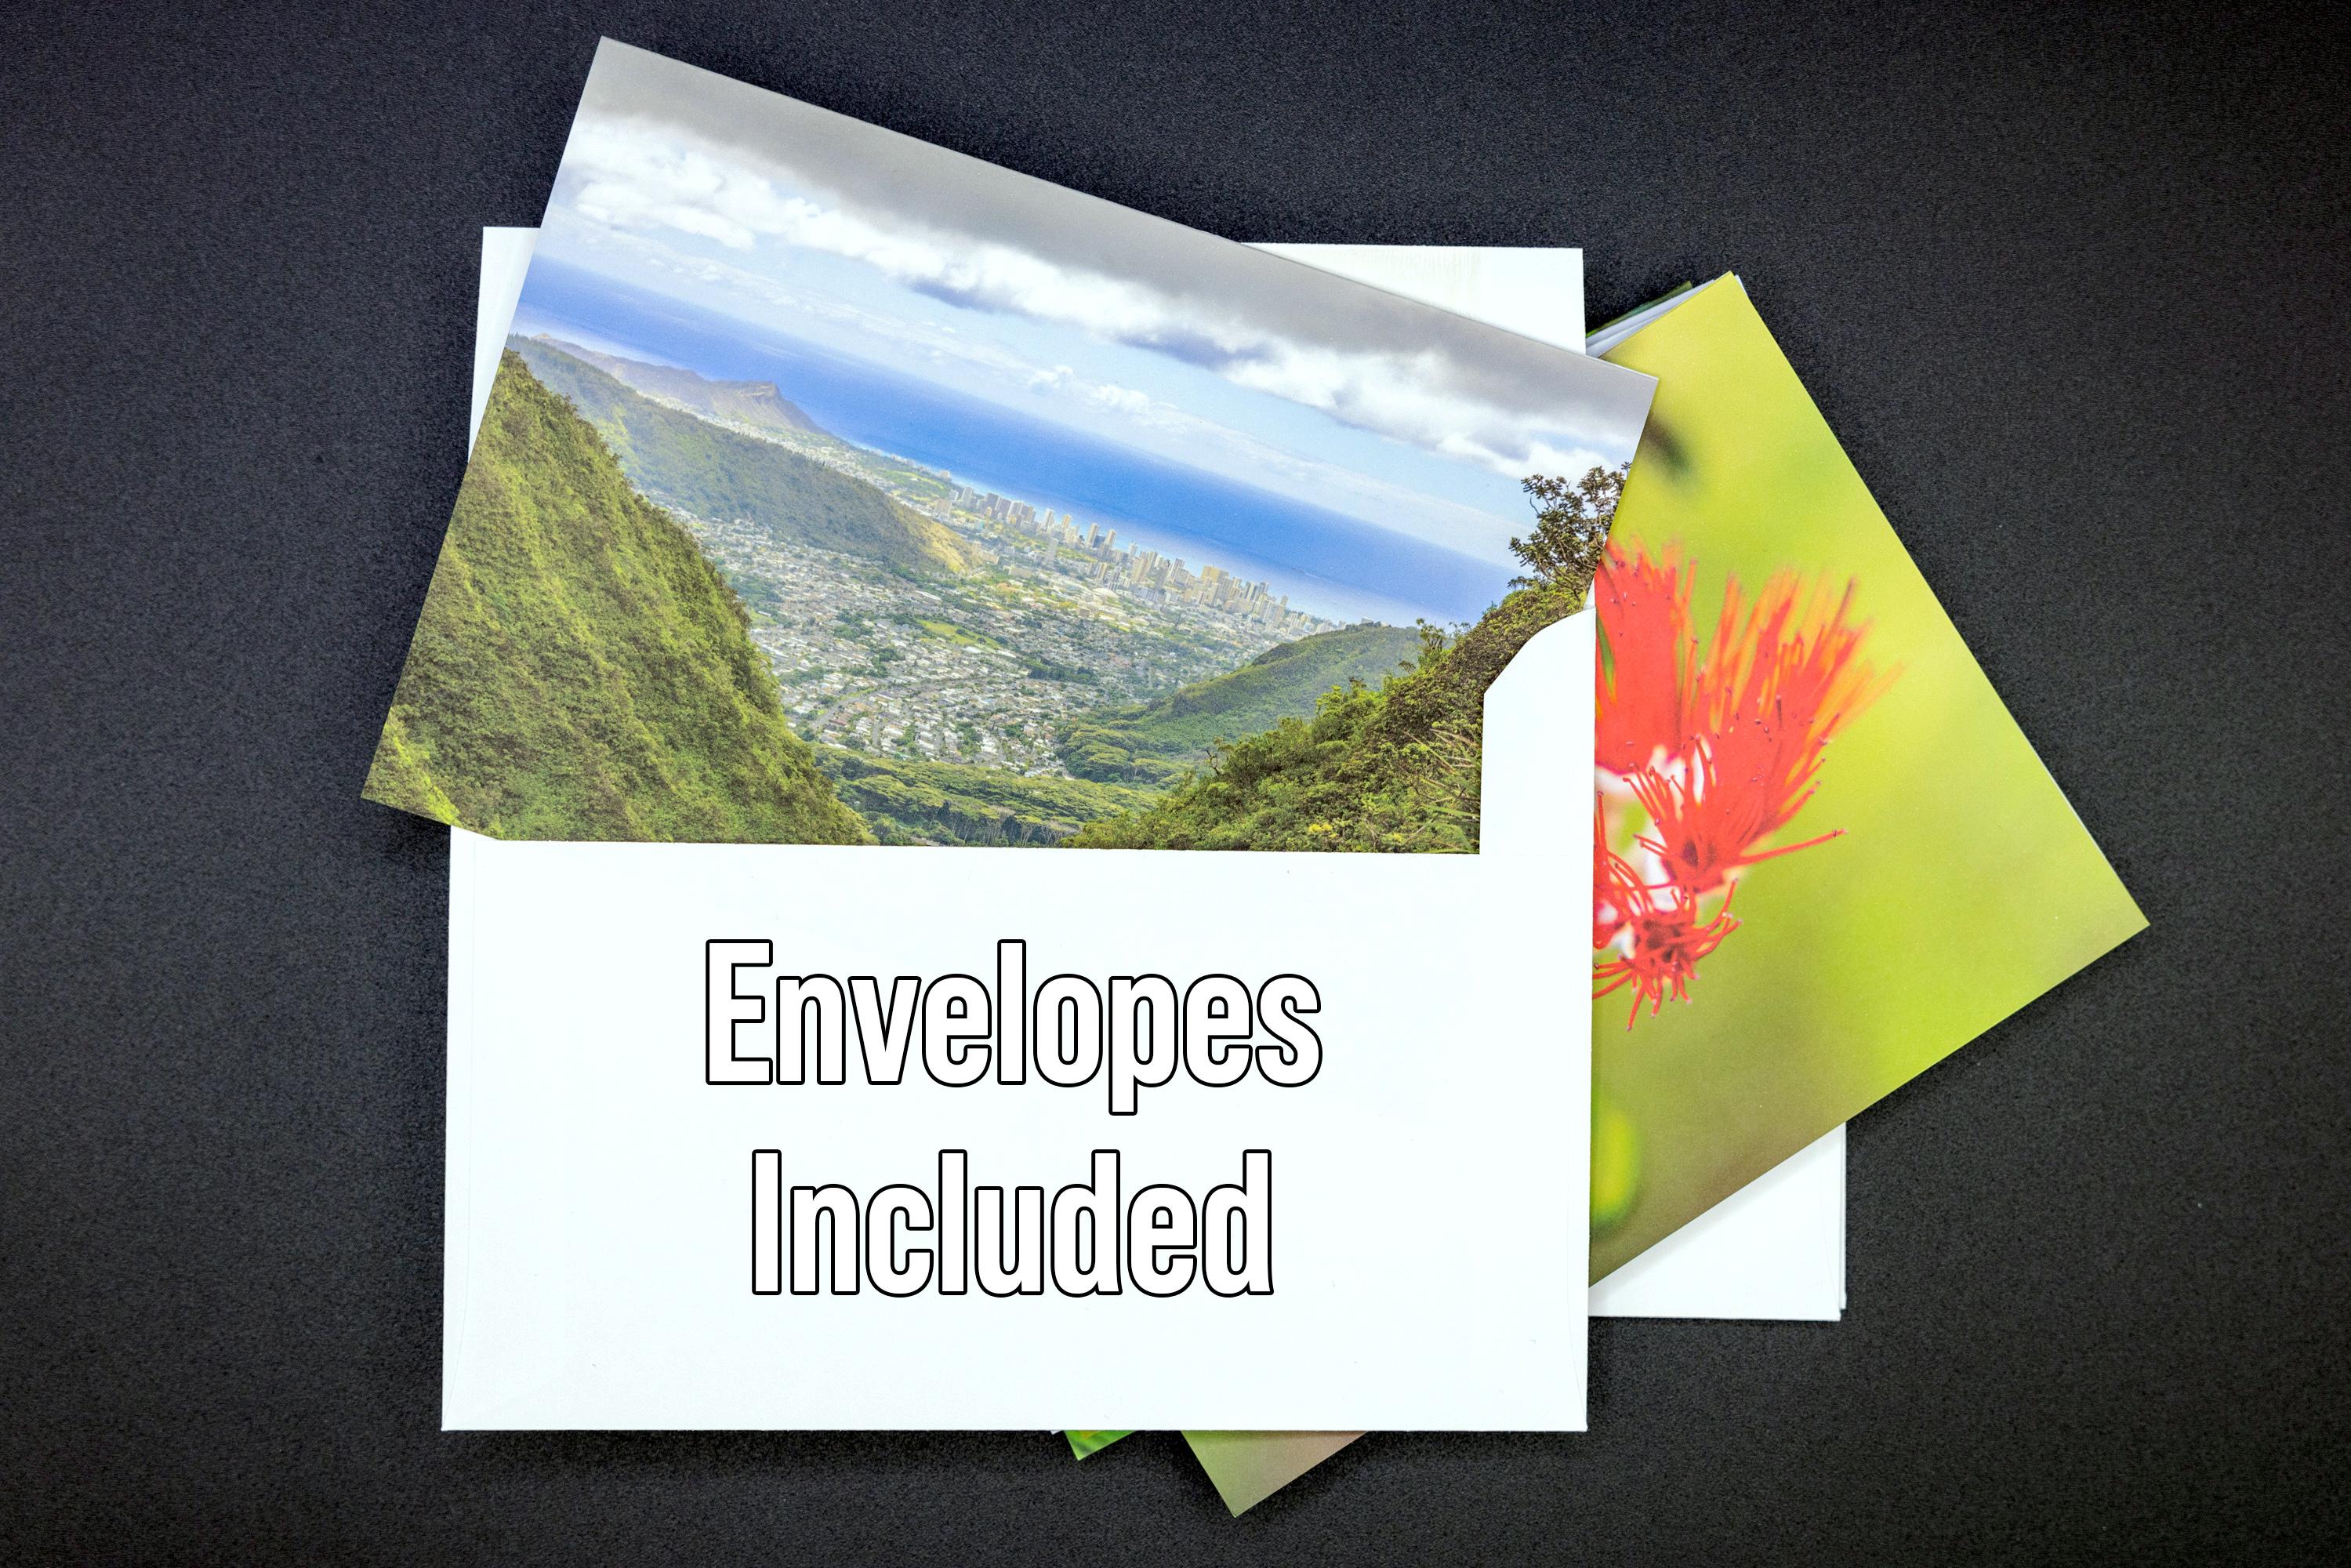 5 Hawaii Pali Notches Hike Photo Greeting Cards Pack with Envelopes, 5x7"